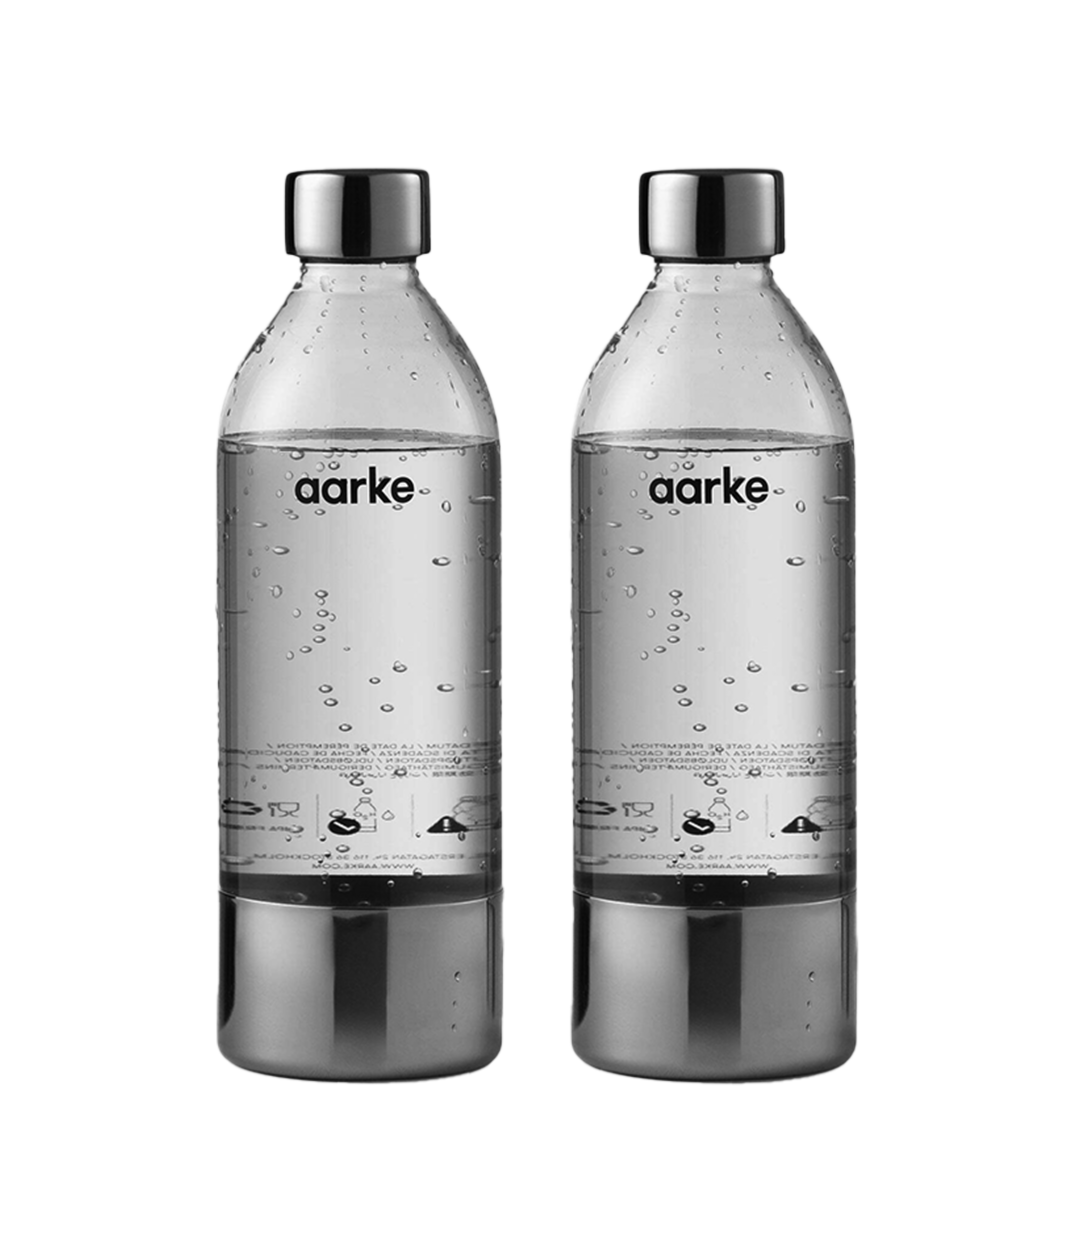  aarke Extra PET Stainless Steel bottle (for use